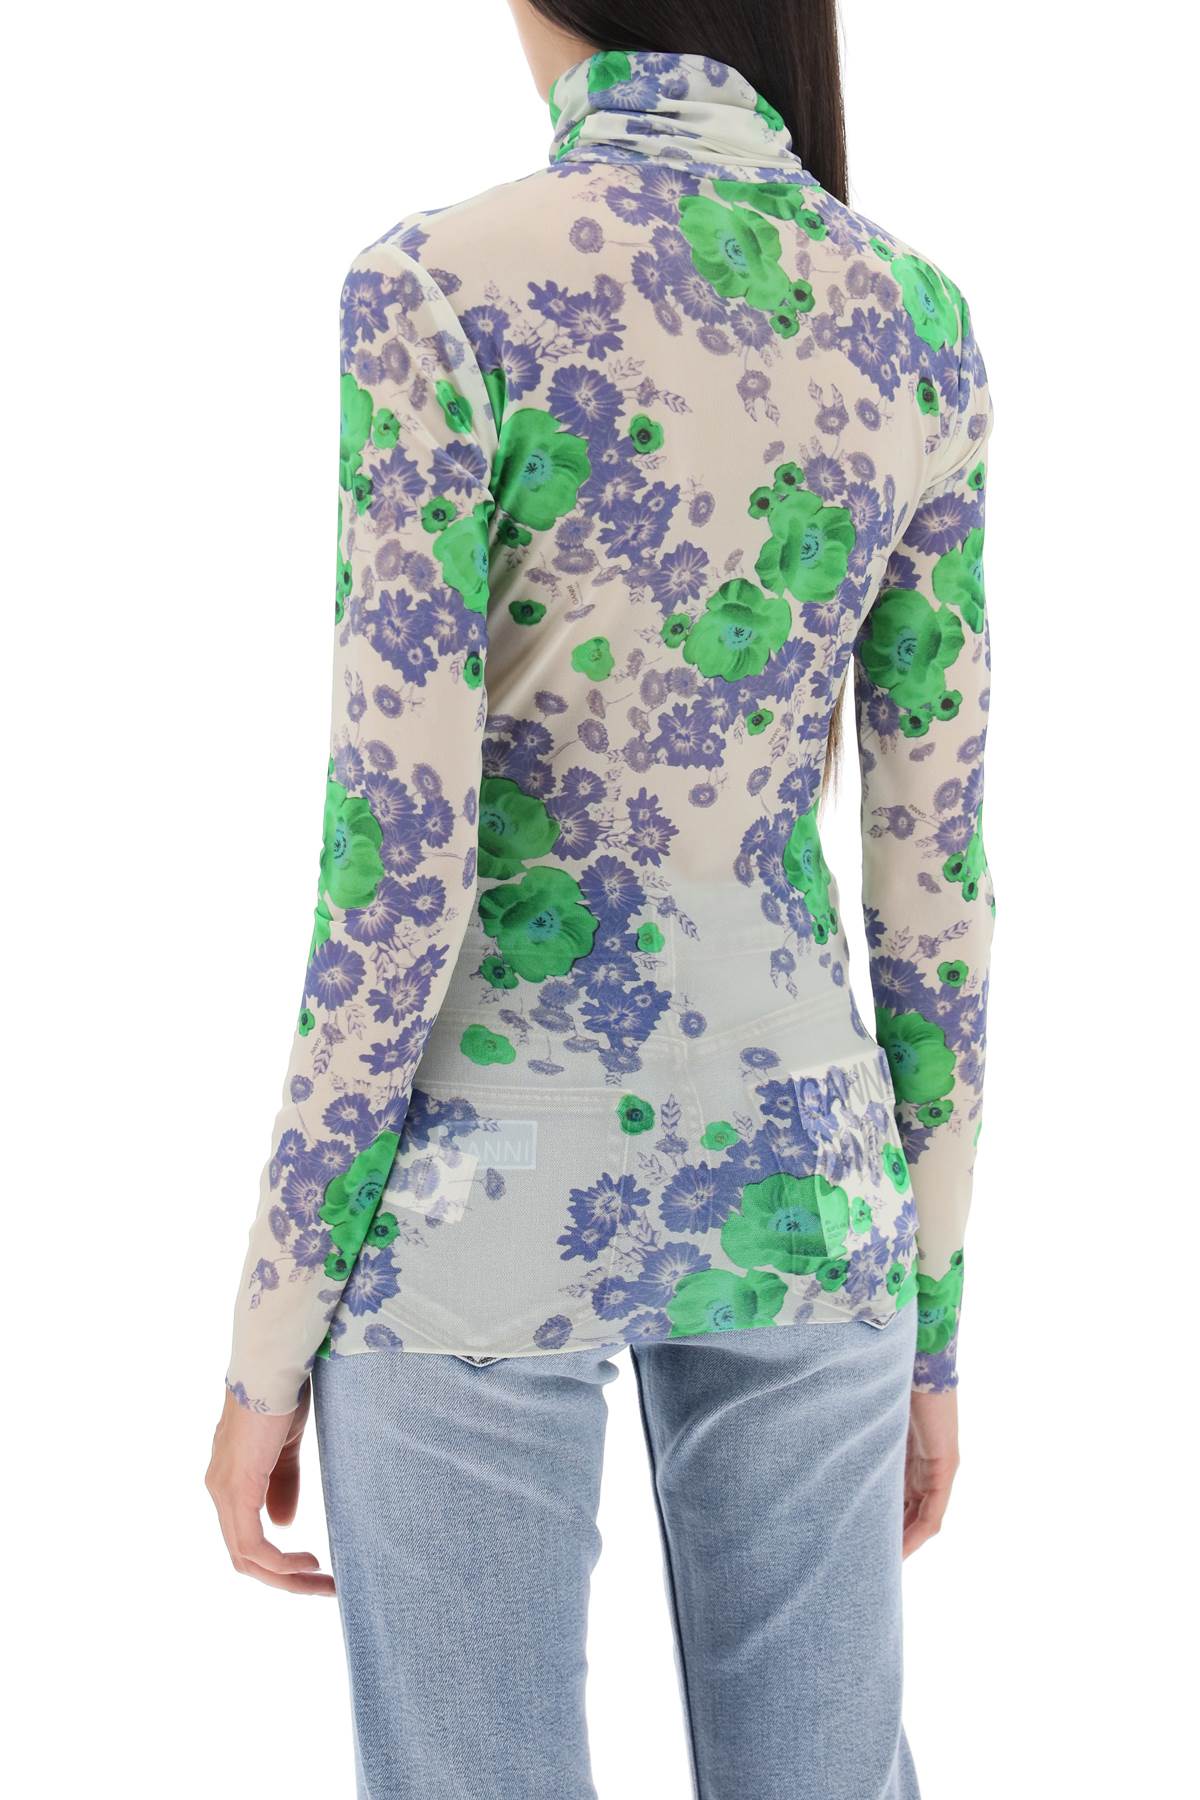 Ganni long-sleeved top in mesh with floral pattern-2